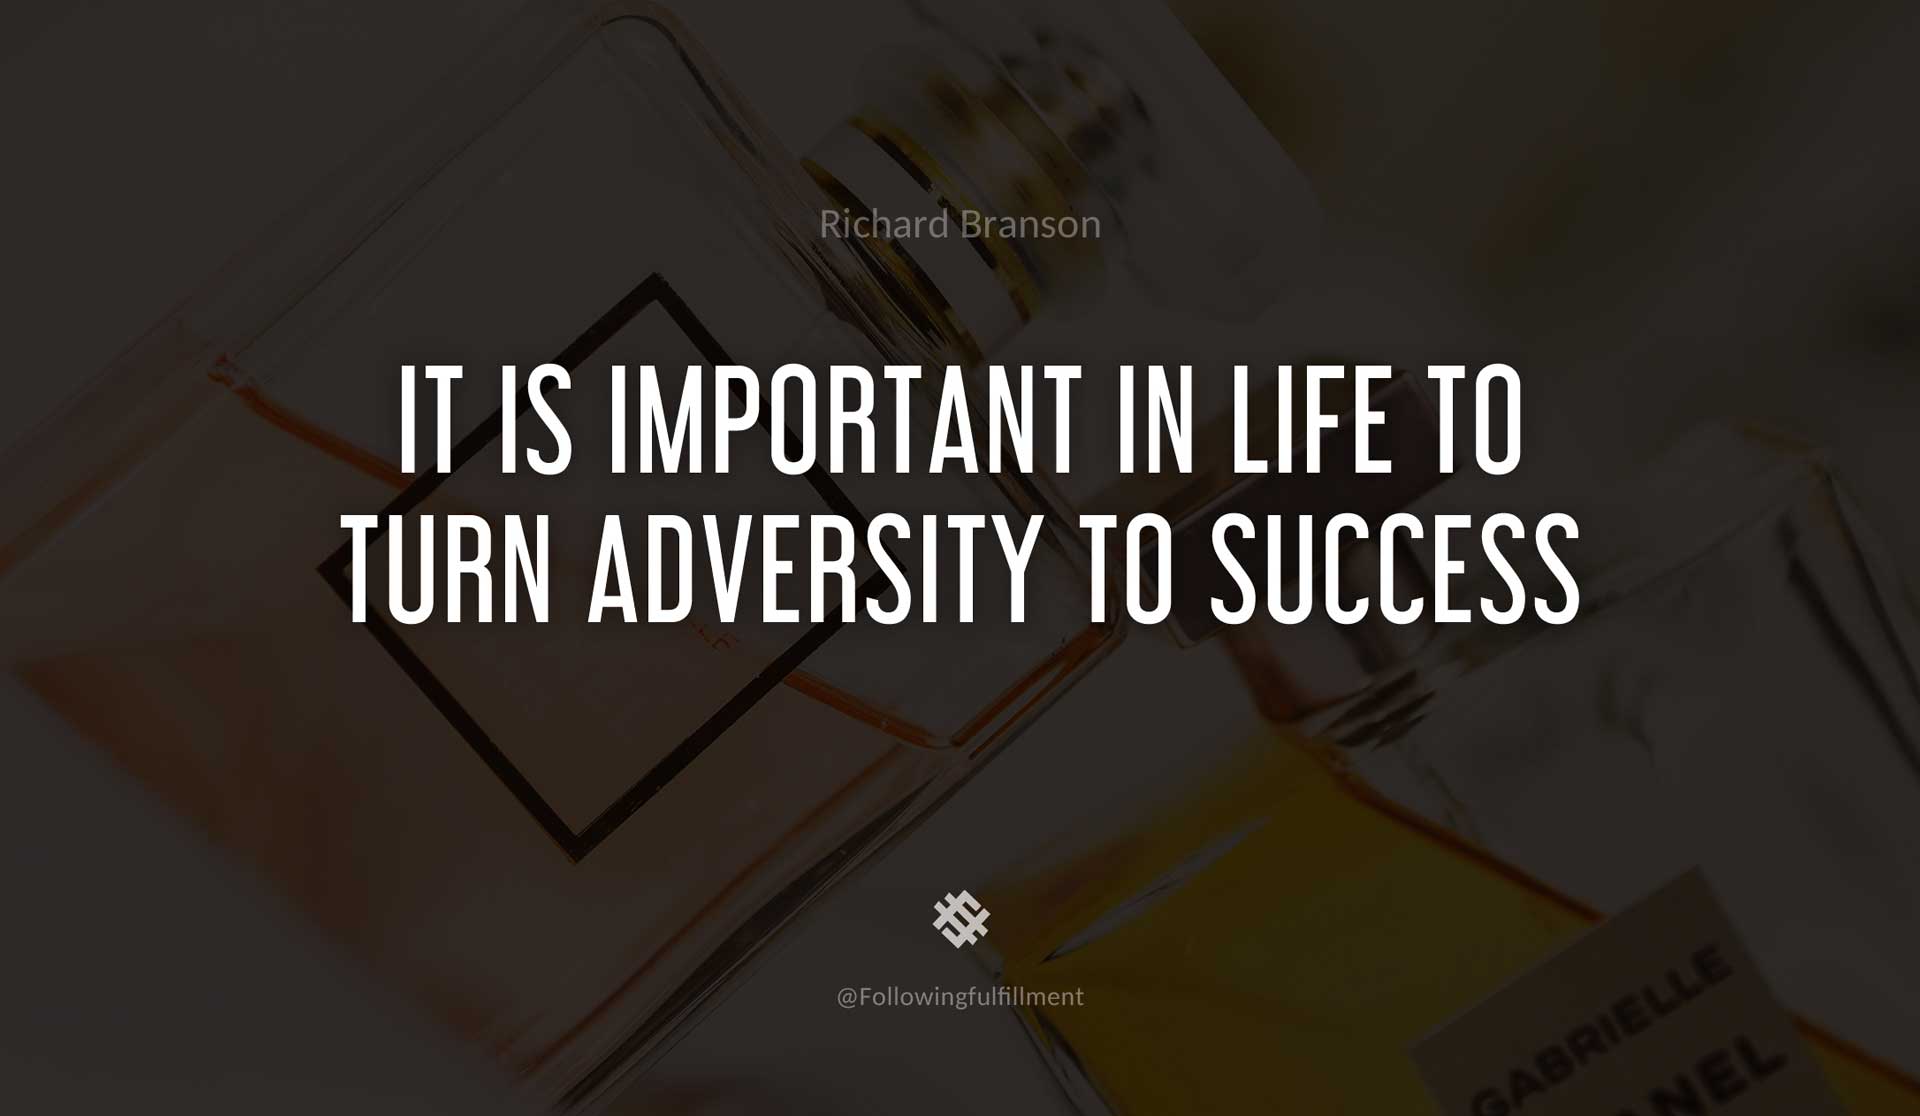 It-is-important-in-life-to-turn-adversity-to-success-RICHARD-BRANSON-Quote.jpg